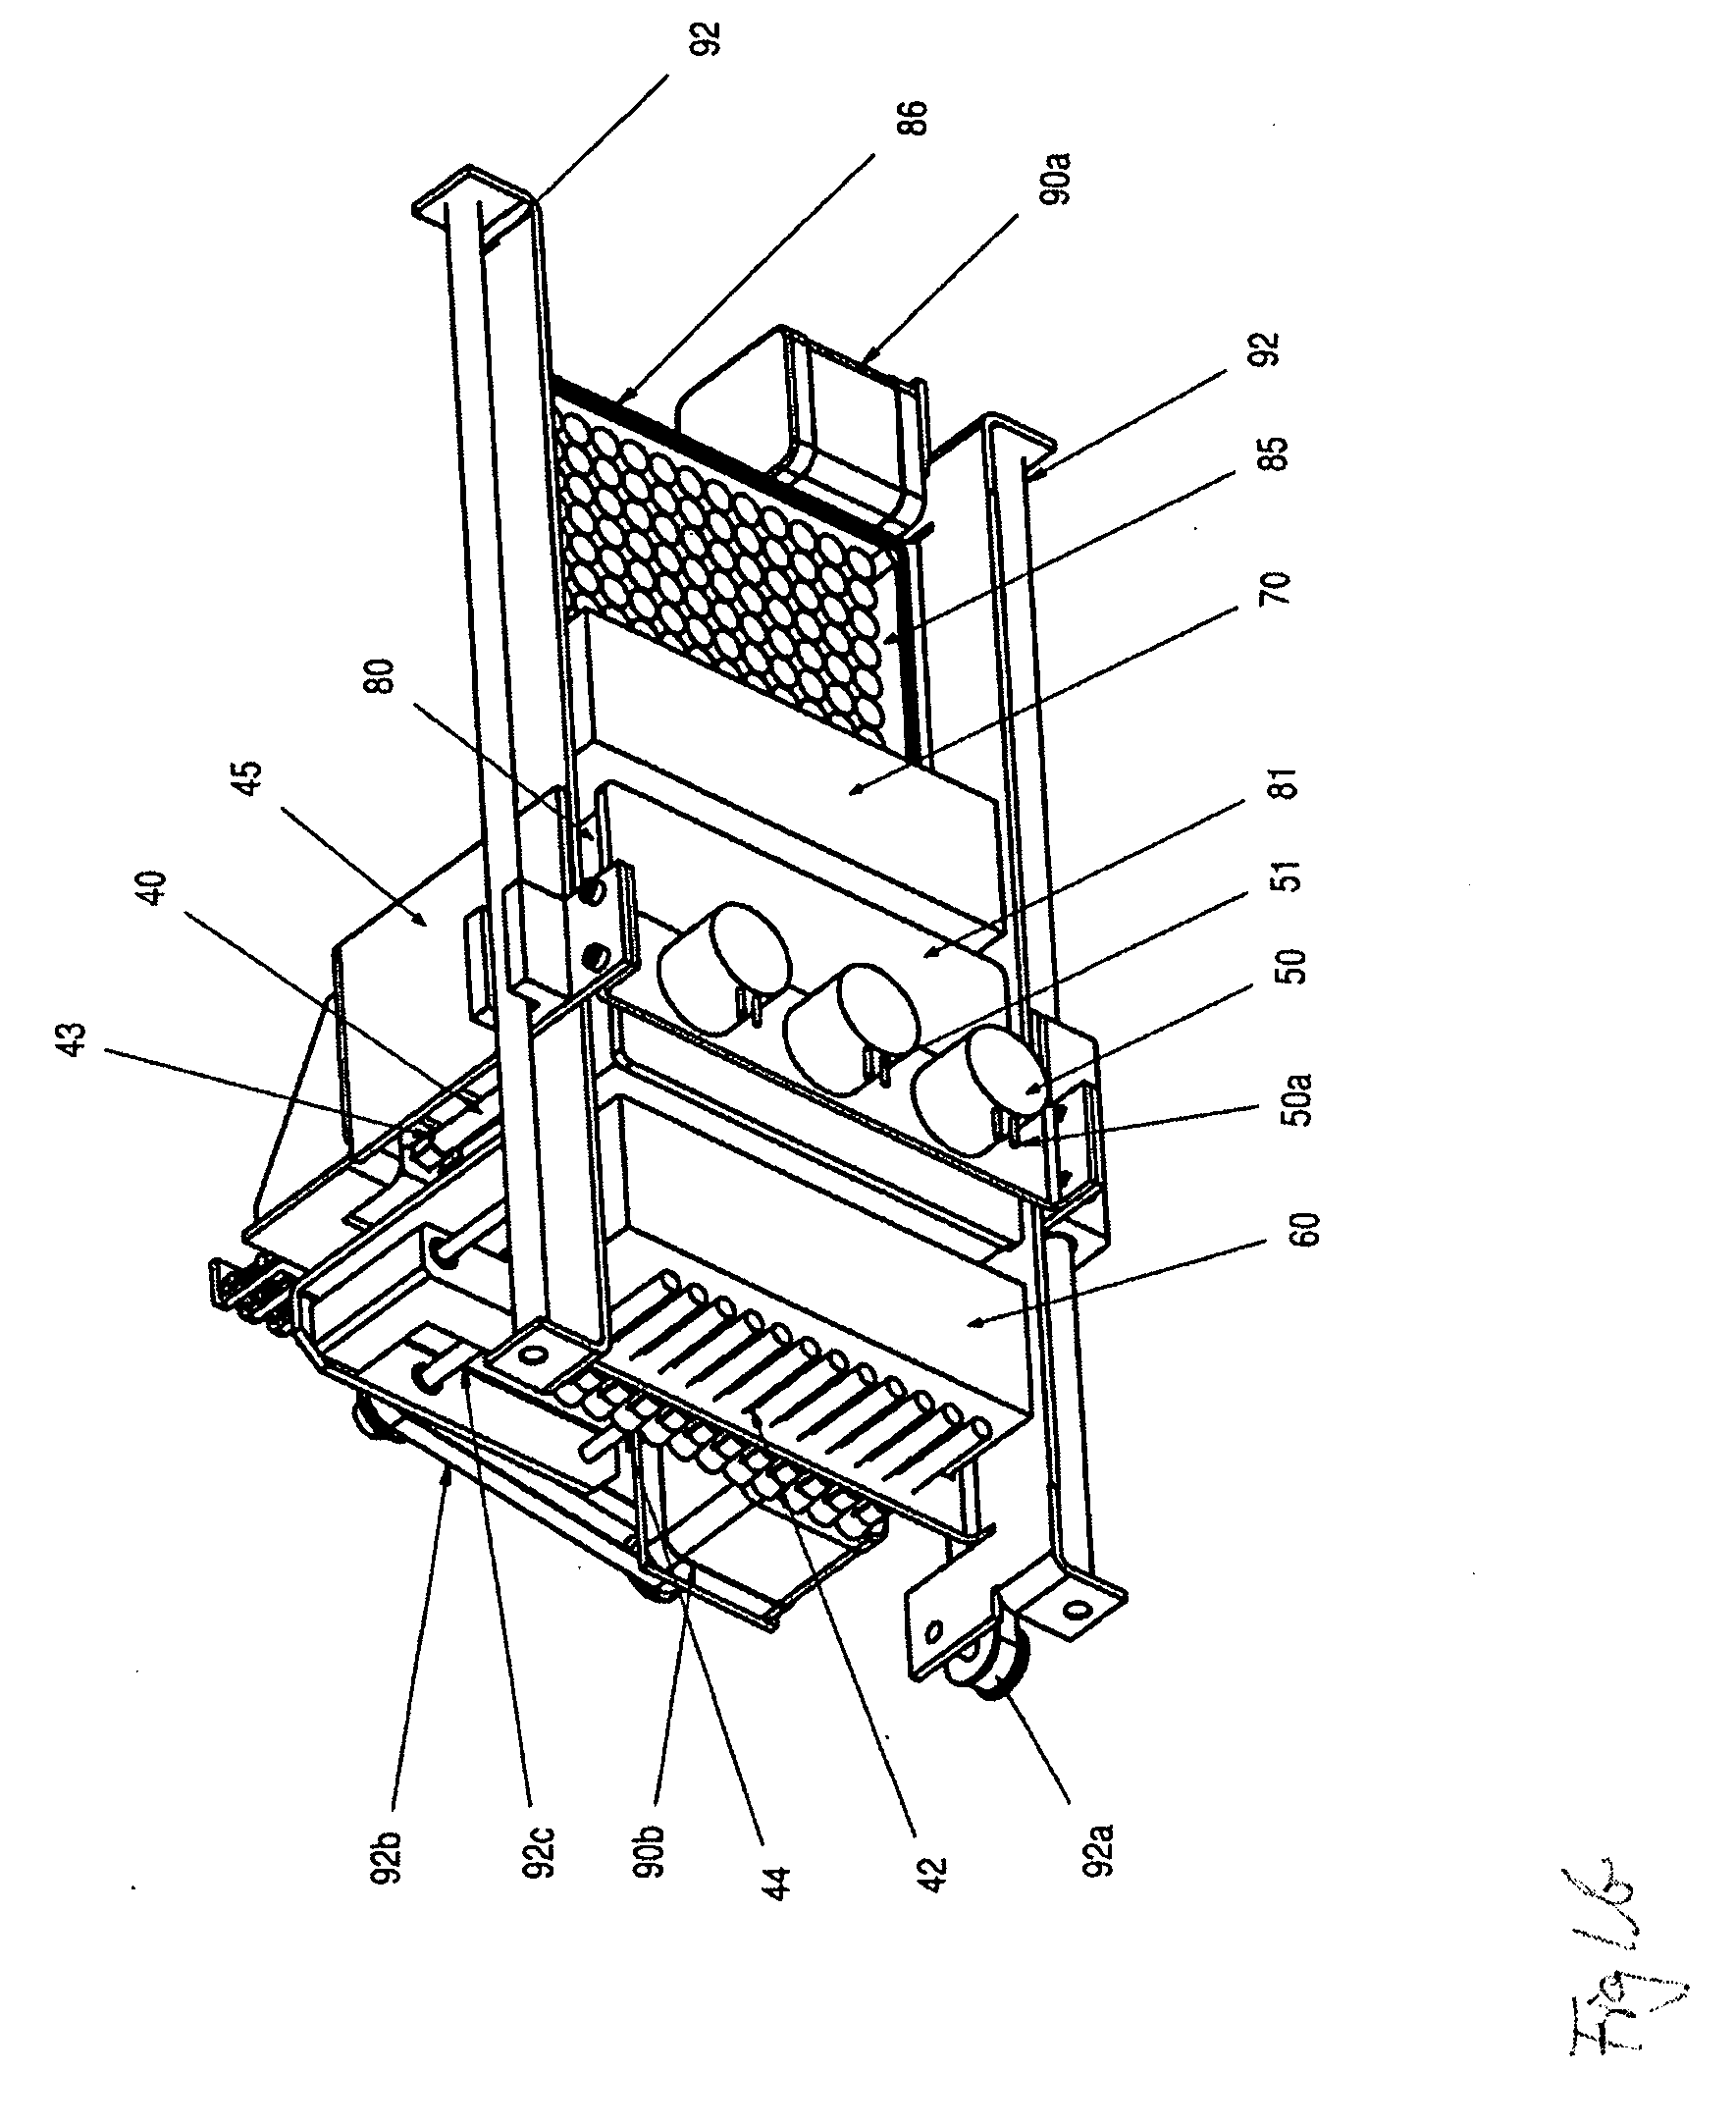 Apparatus and method for the purification of biomolecules